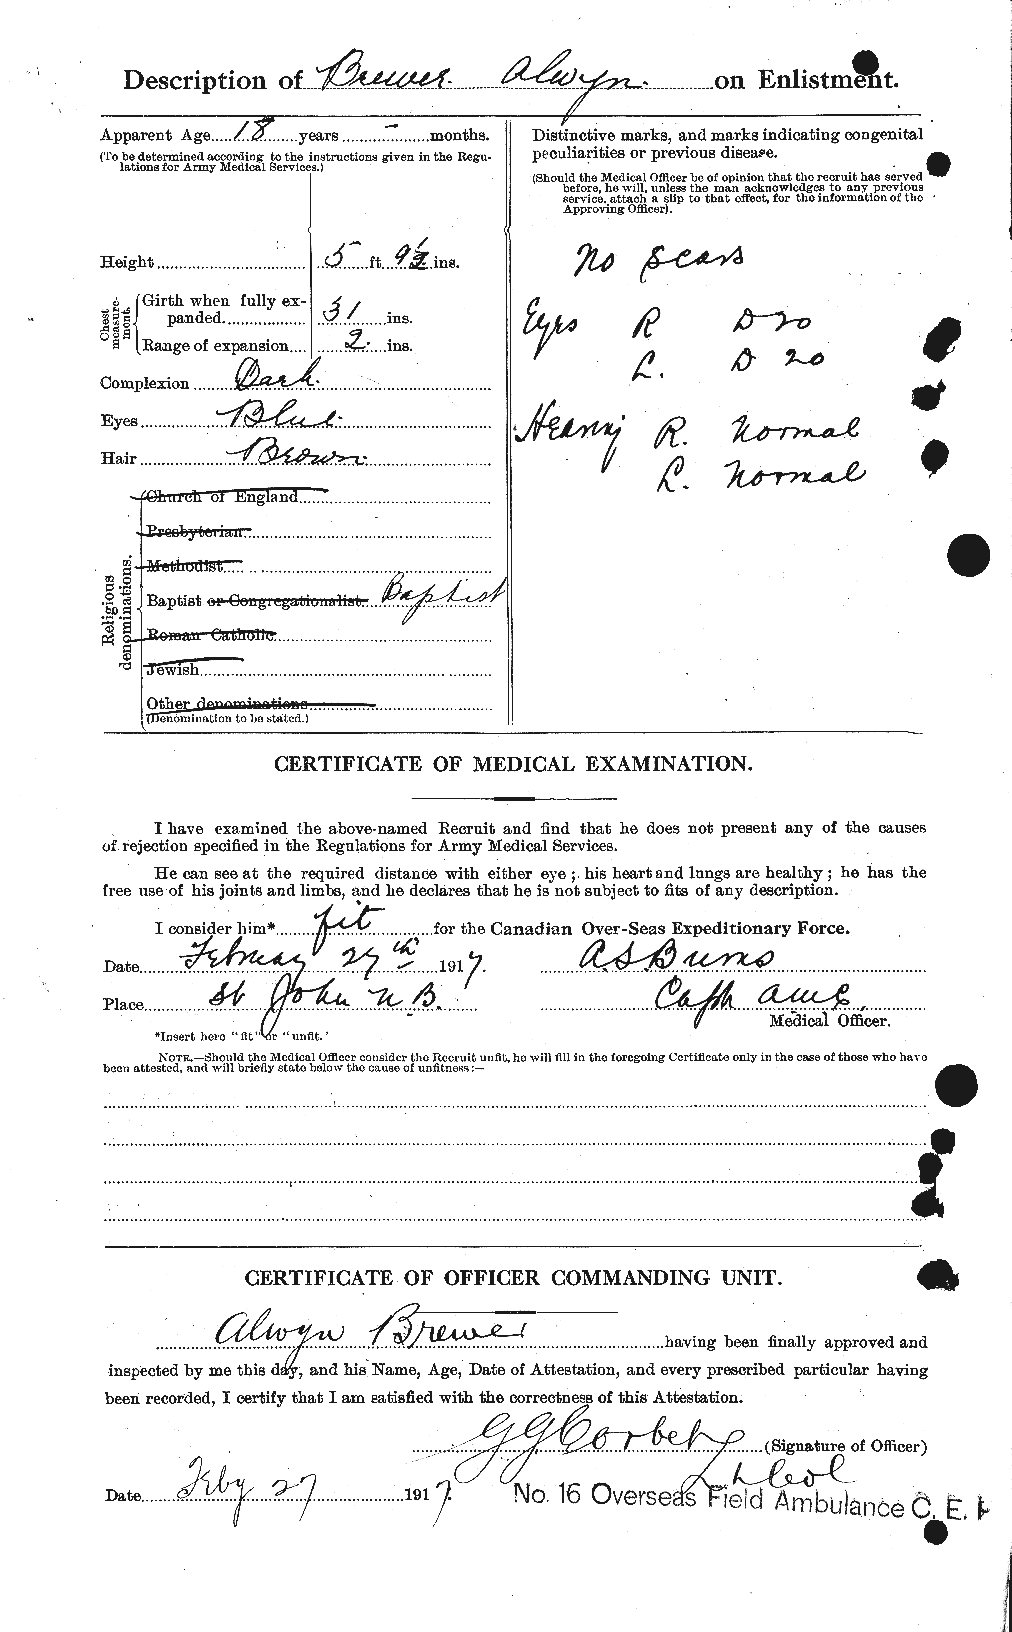 Personnel Records of the First World War - CEF 258921b